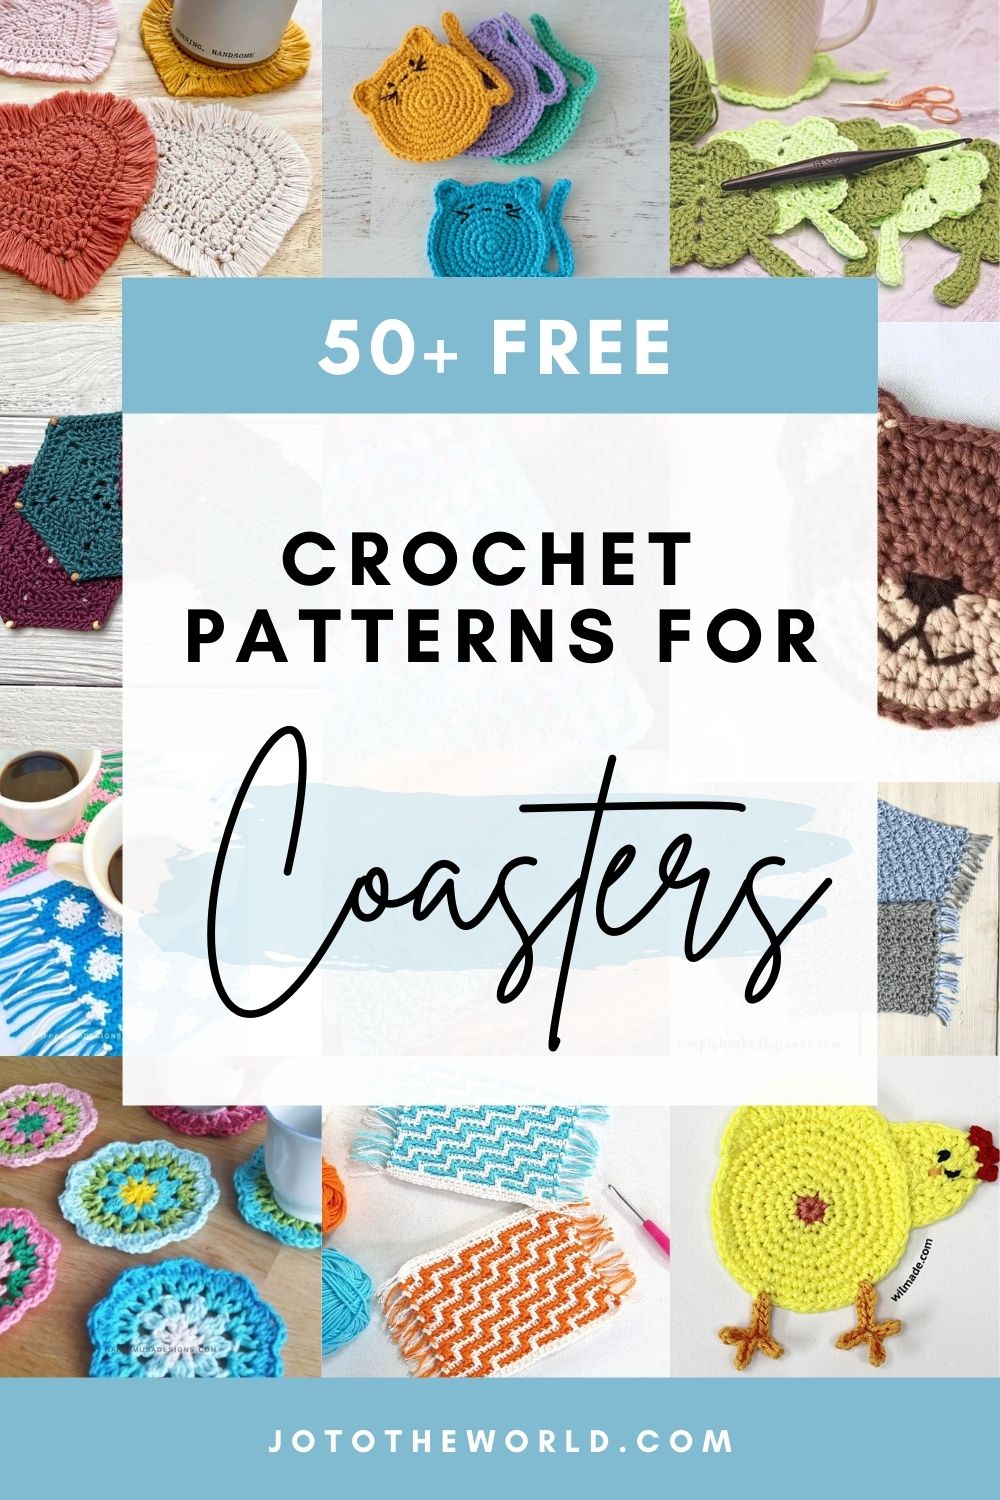 Free Crochet Patterns for Coasters